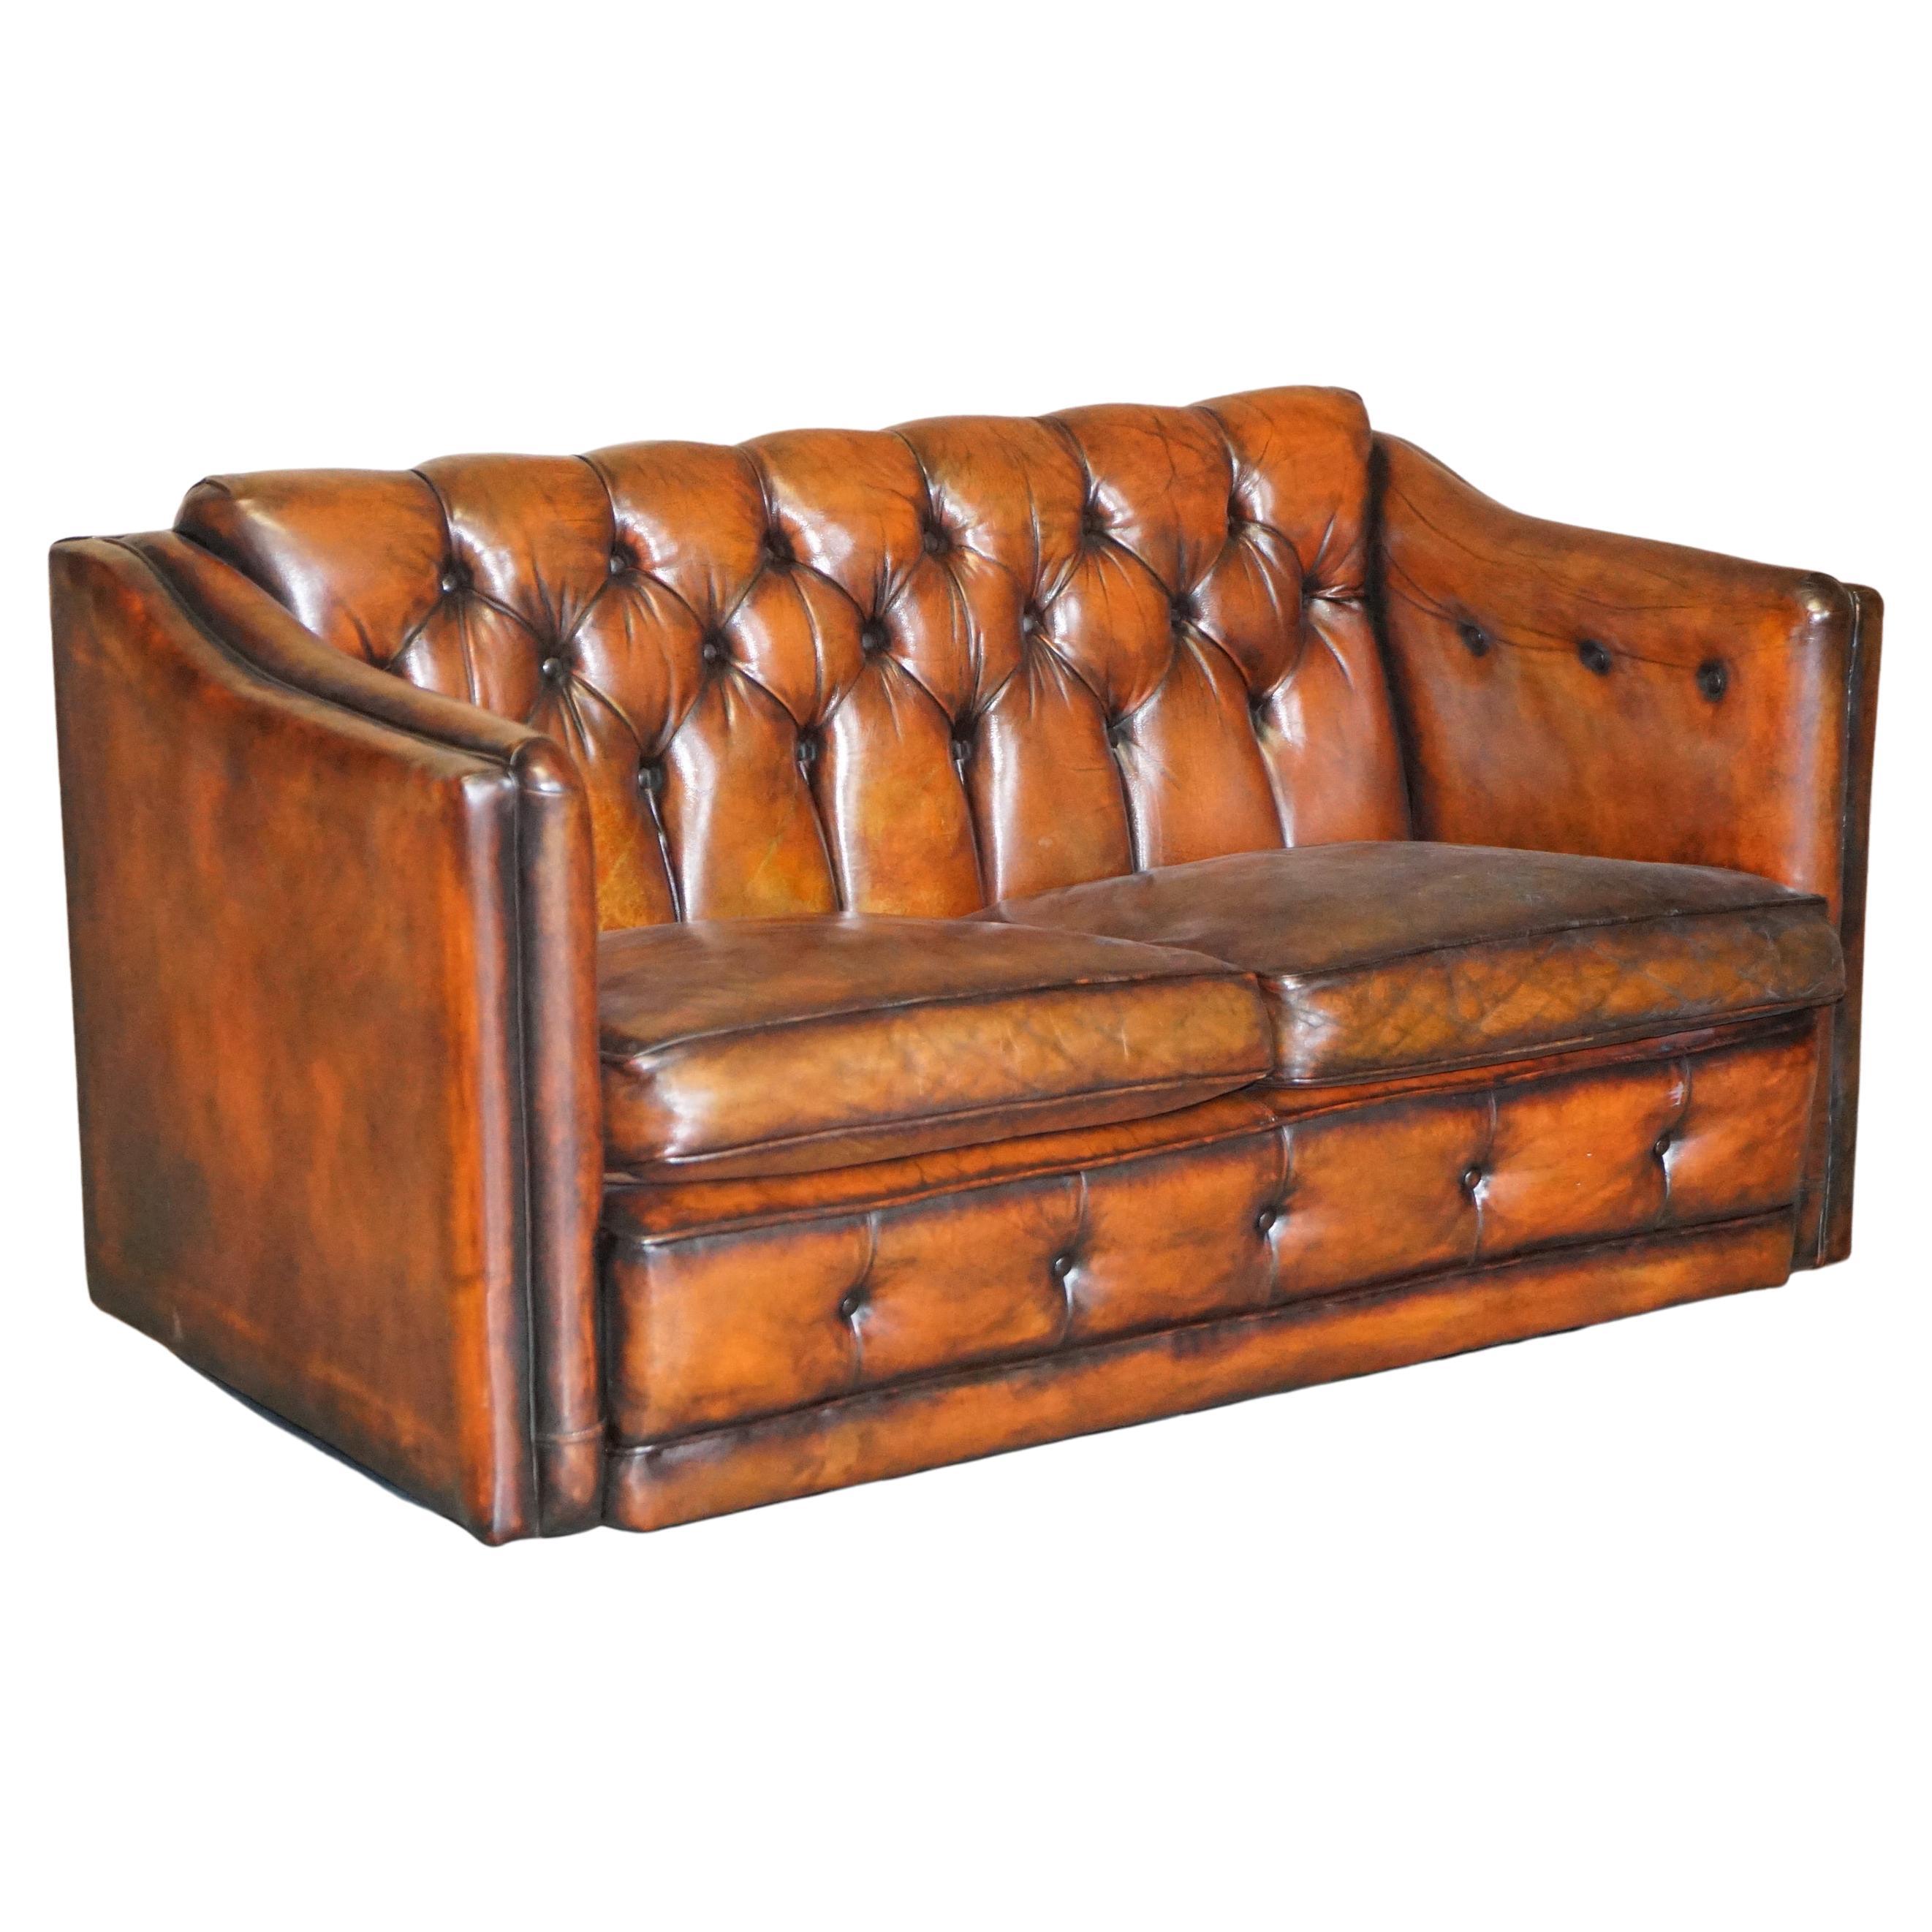 Circa 1920 Art Deco Fully Restored Chesterfield Brown Leather Sofa Part Suite